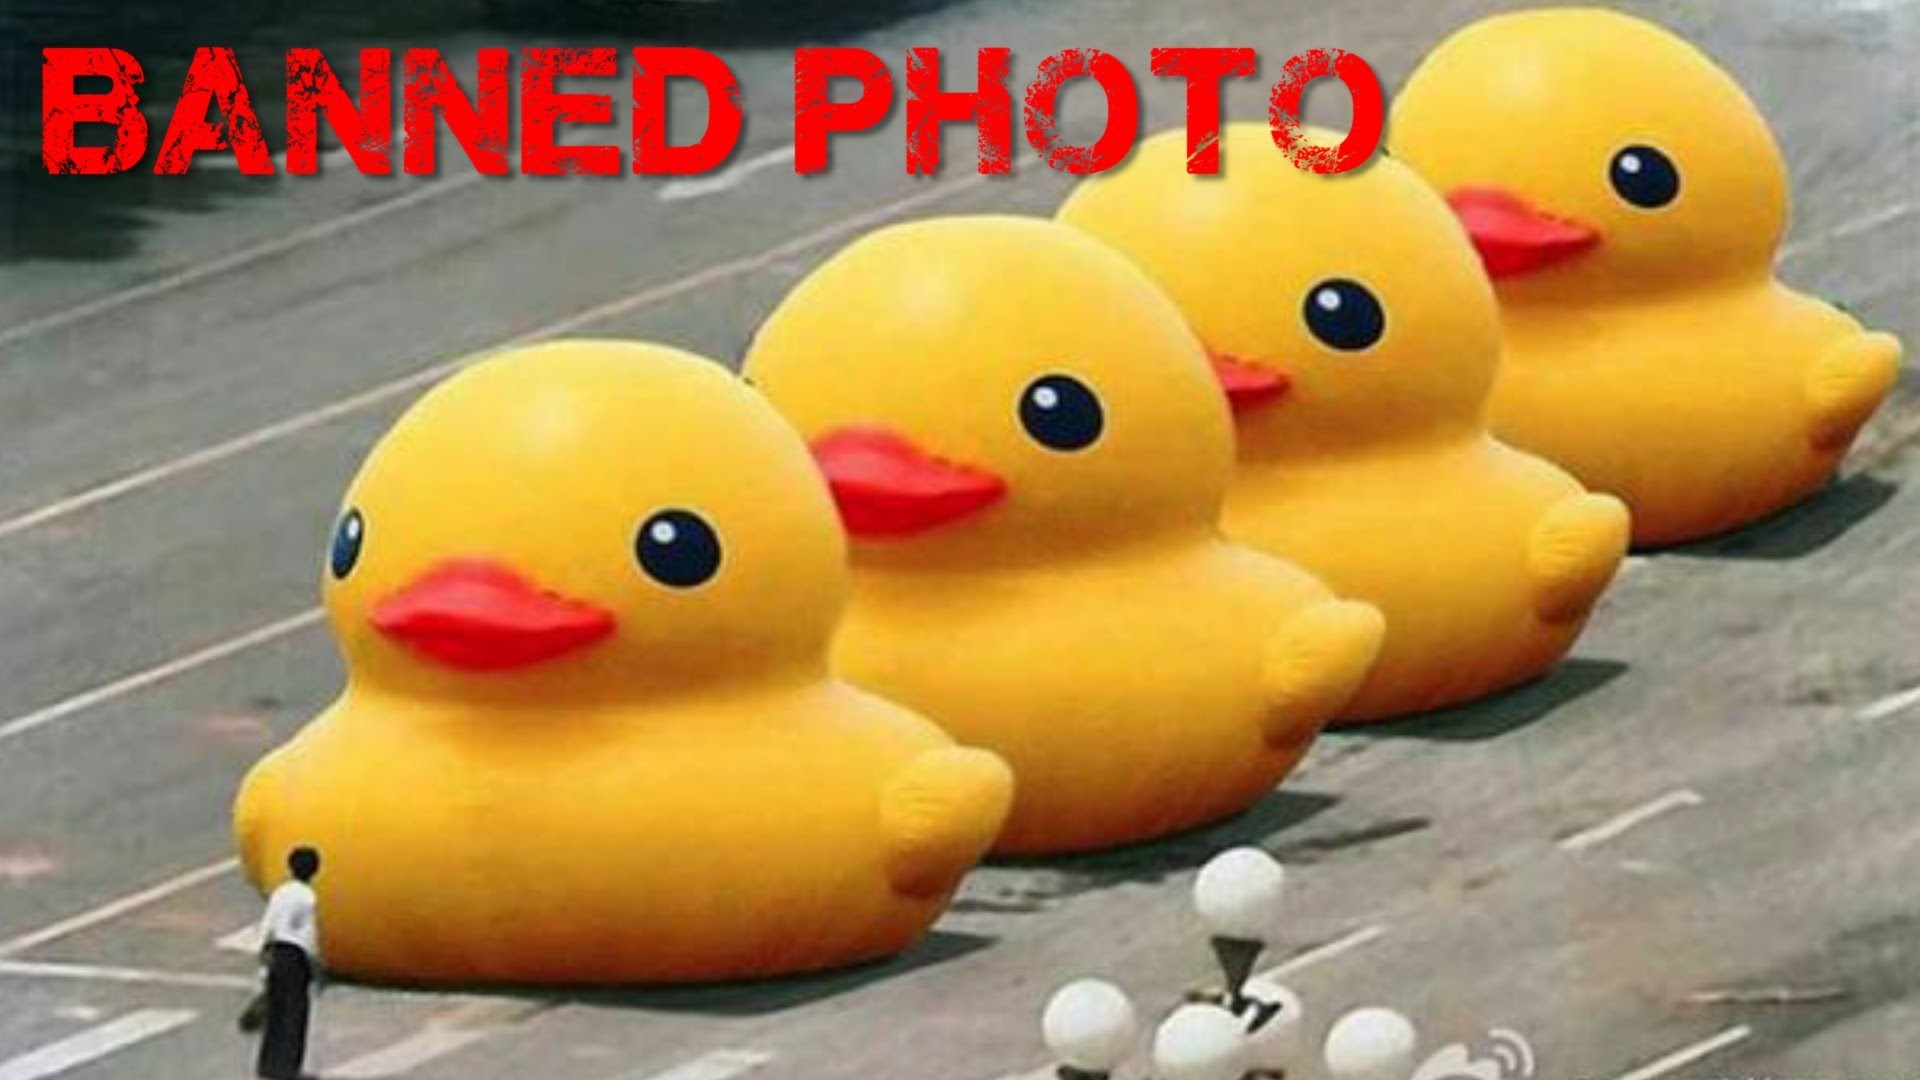 1920x1080 "Big Yellow Duck" Banned on Weibo and Other June 4th Terms - YouTube